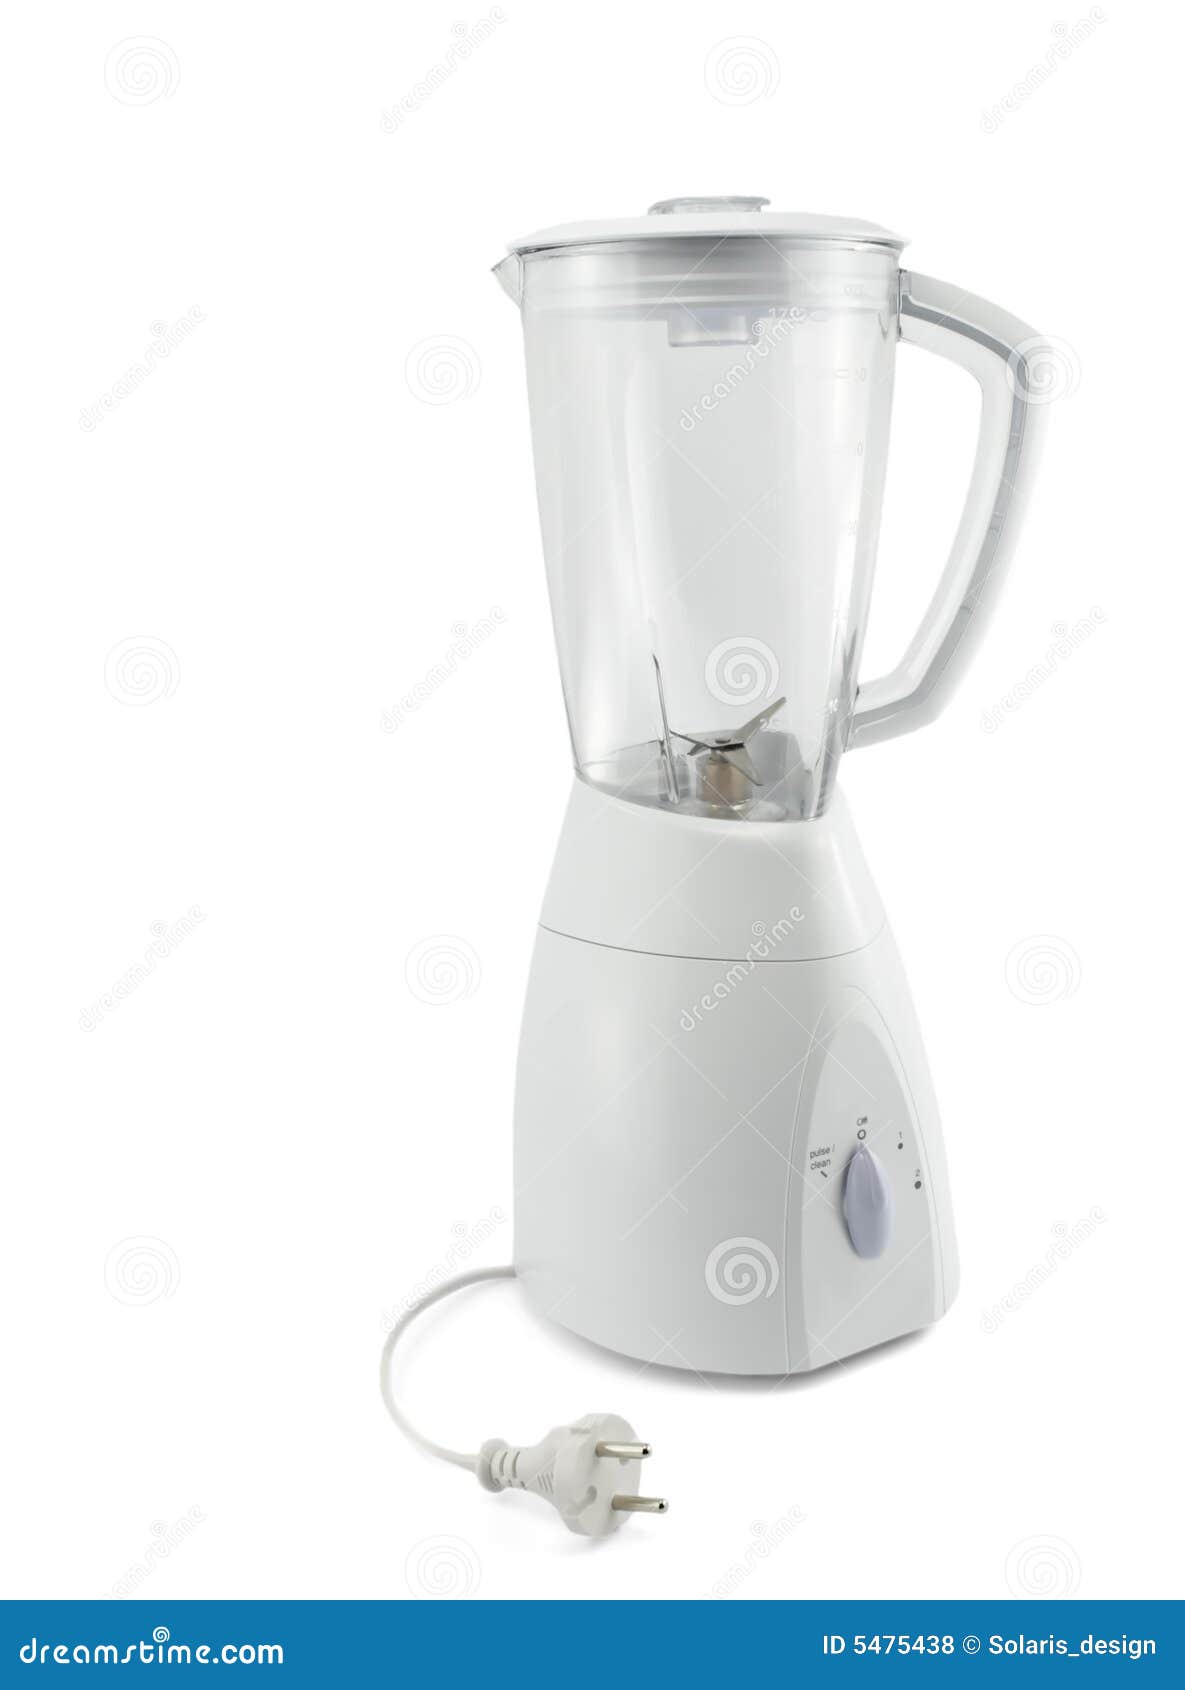 Red Blender With Glass Pitcher Stands Empty Isolated On White Stock Photo -  Download Image Now - iStock